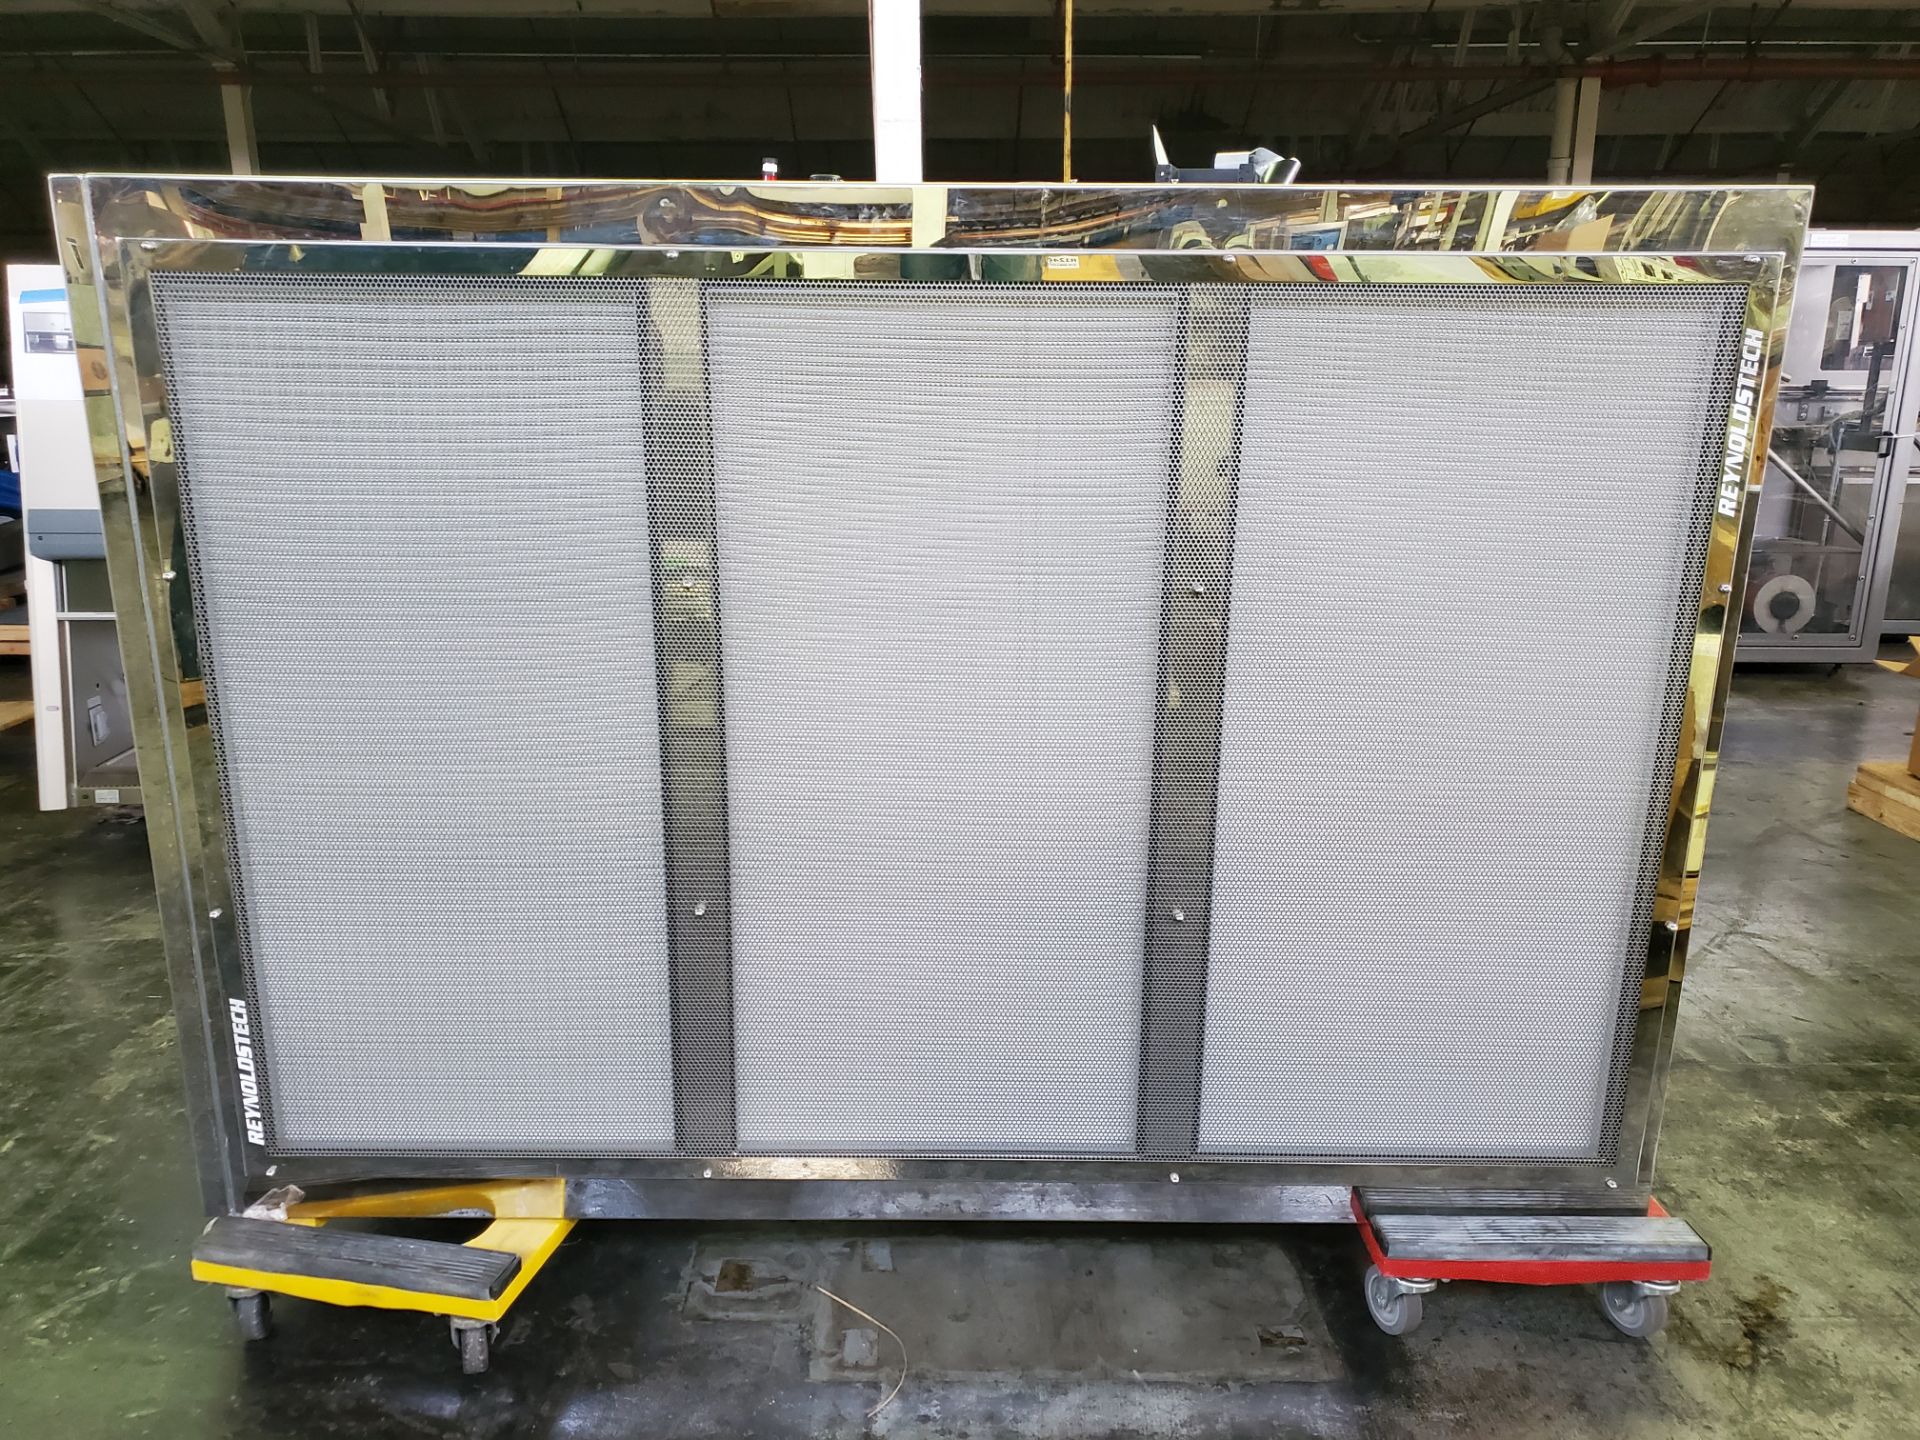 ReynoldsTech HEPA filter unit, 75" x 47" filter area, (3) zones with blowers